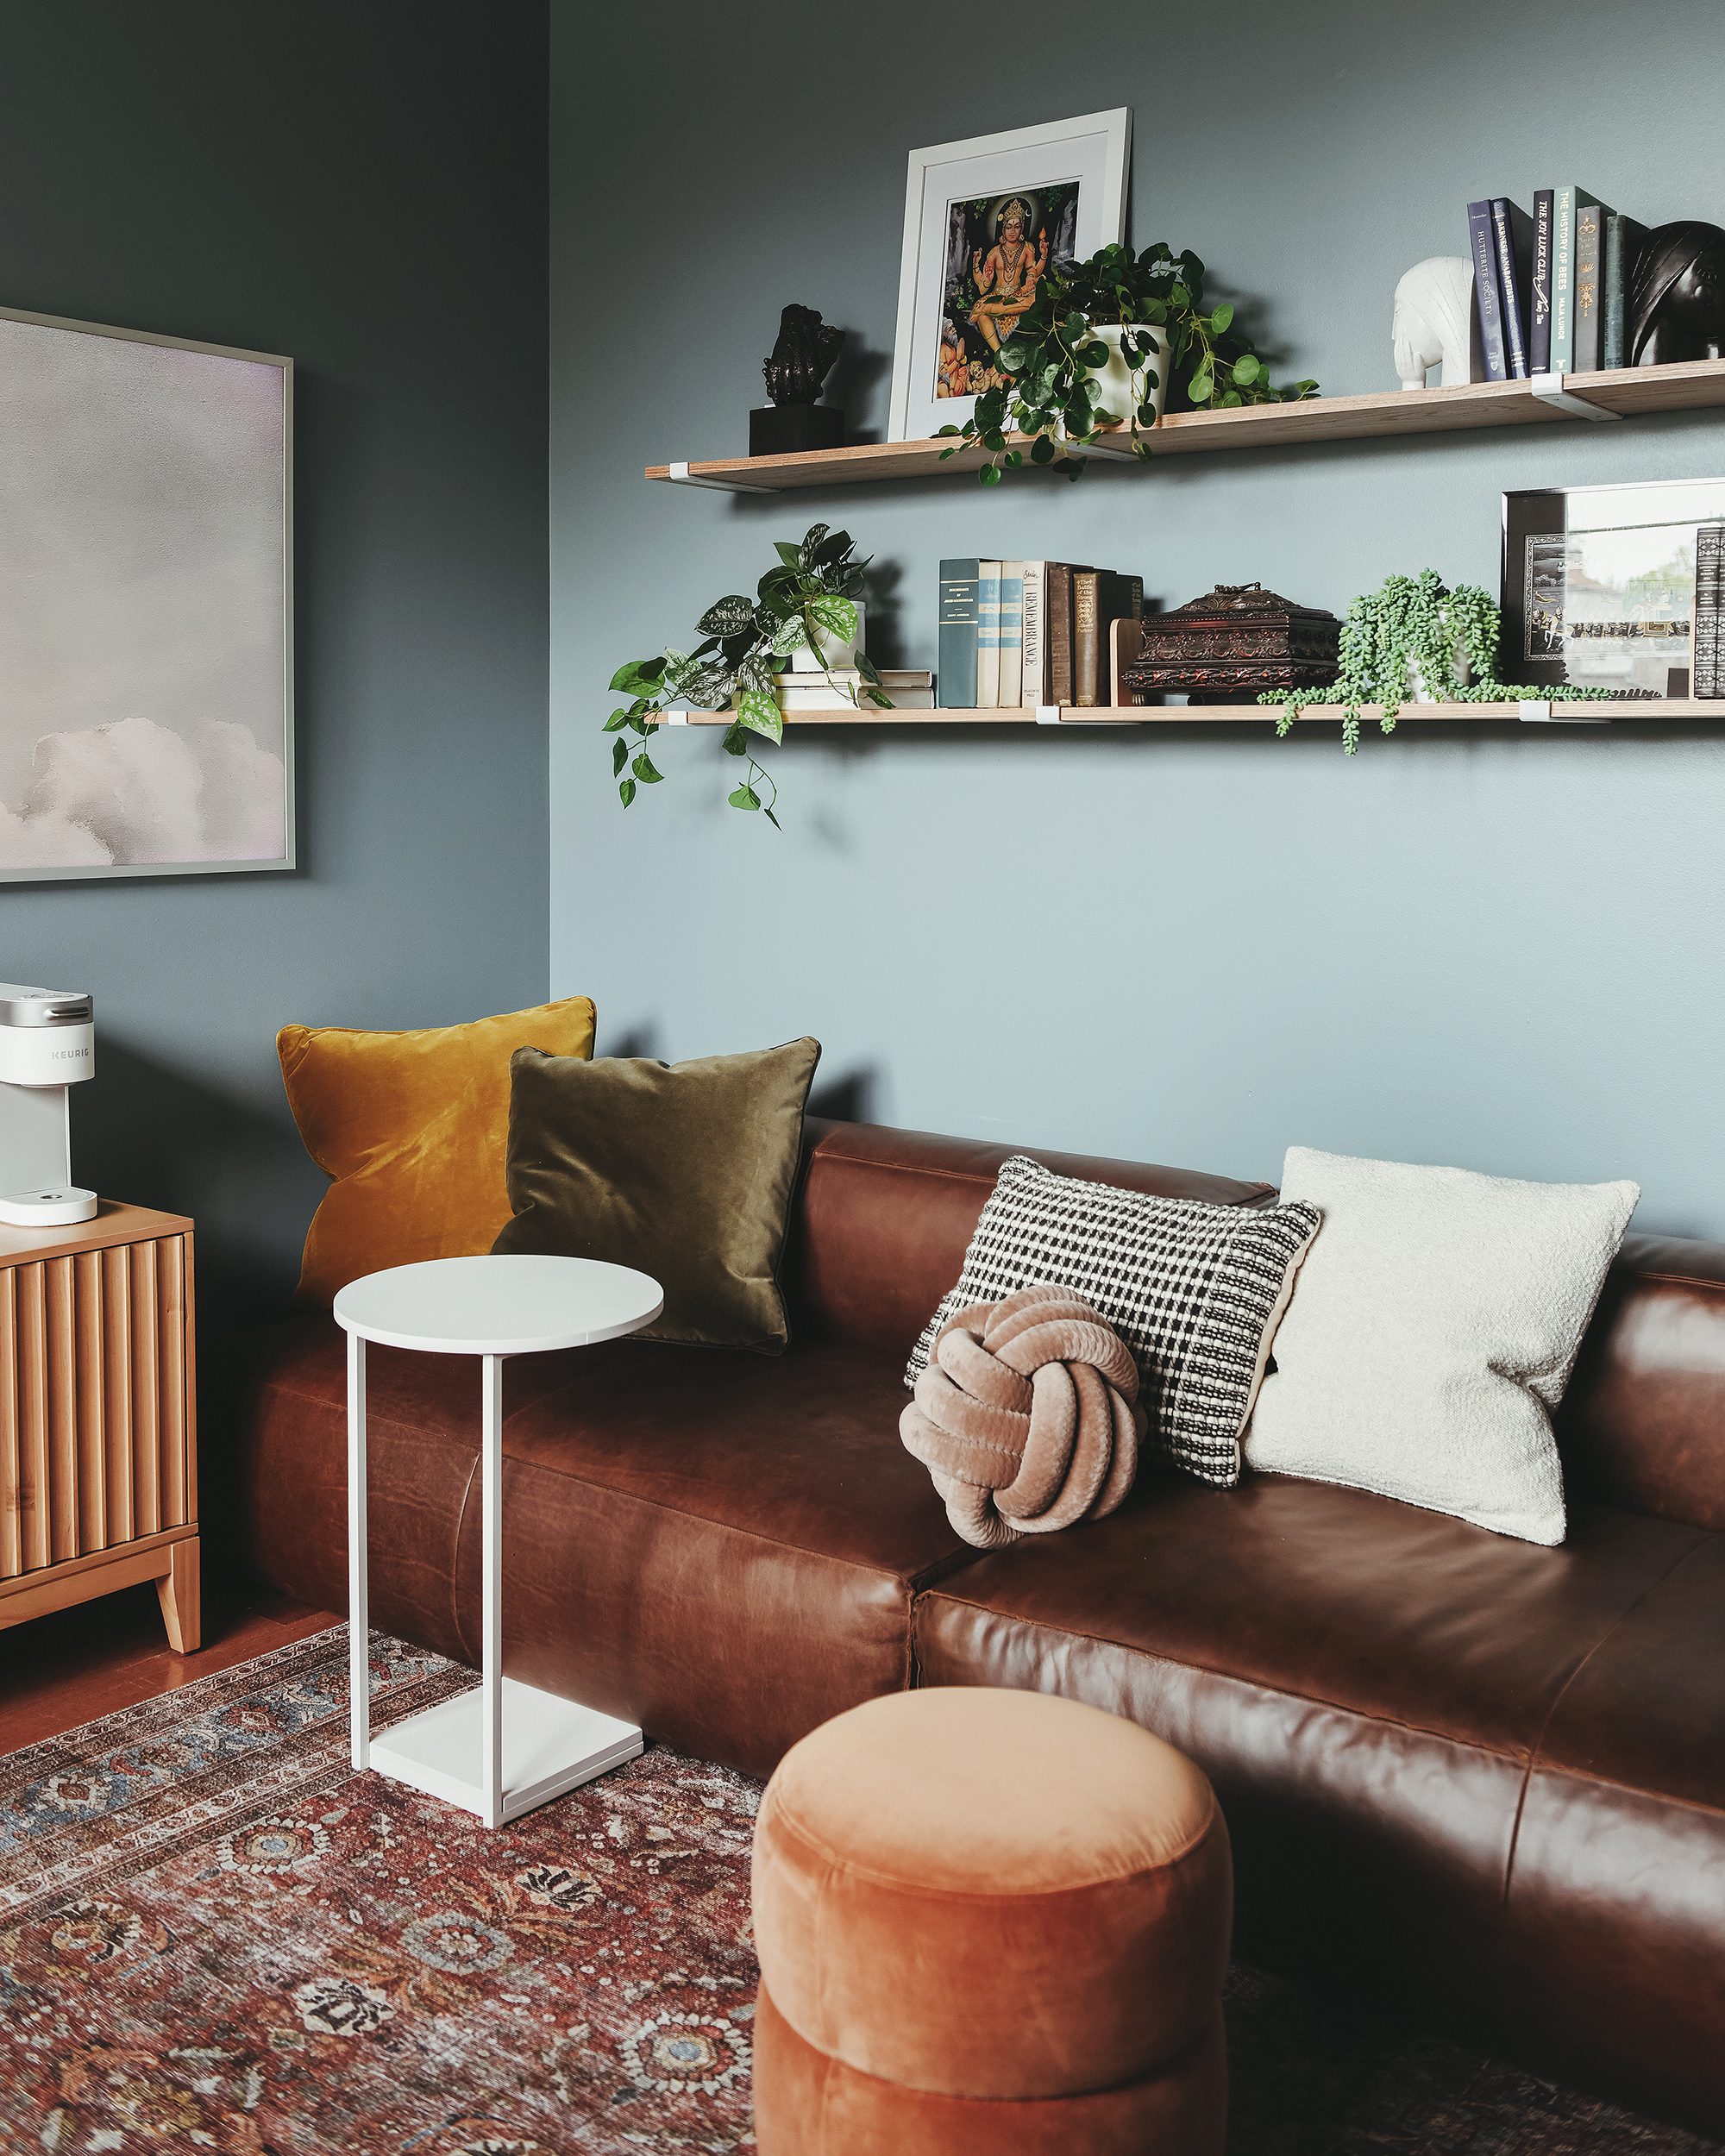 The 'after' view of the cozy leather sofa and built-in shelf wall // via Yellow Brick Home